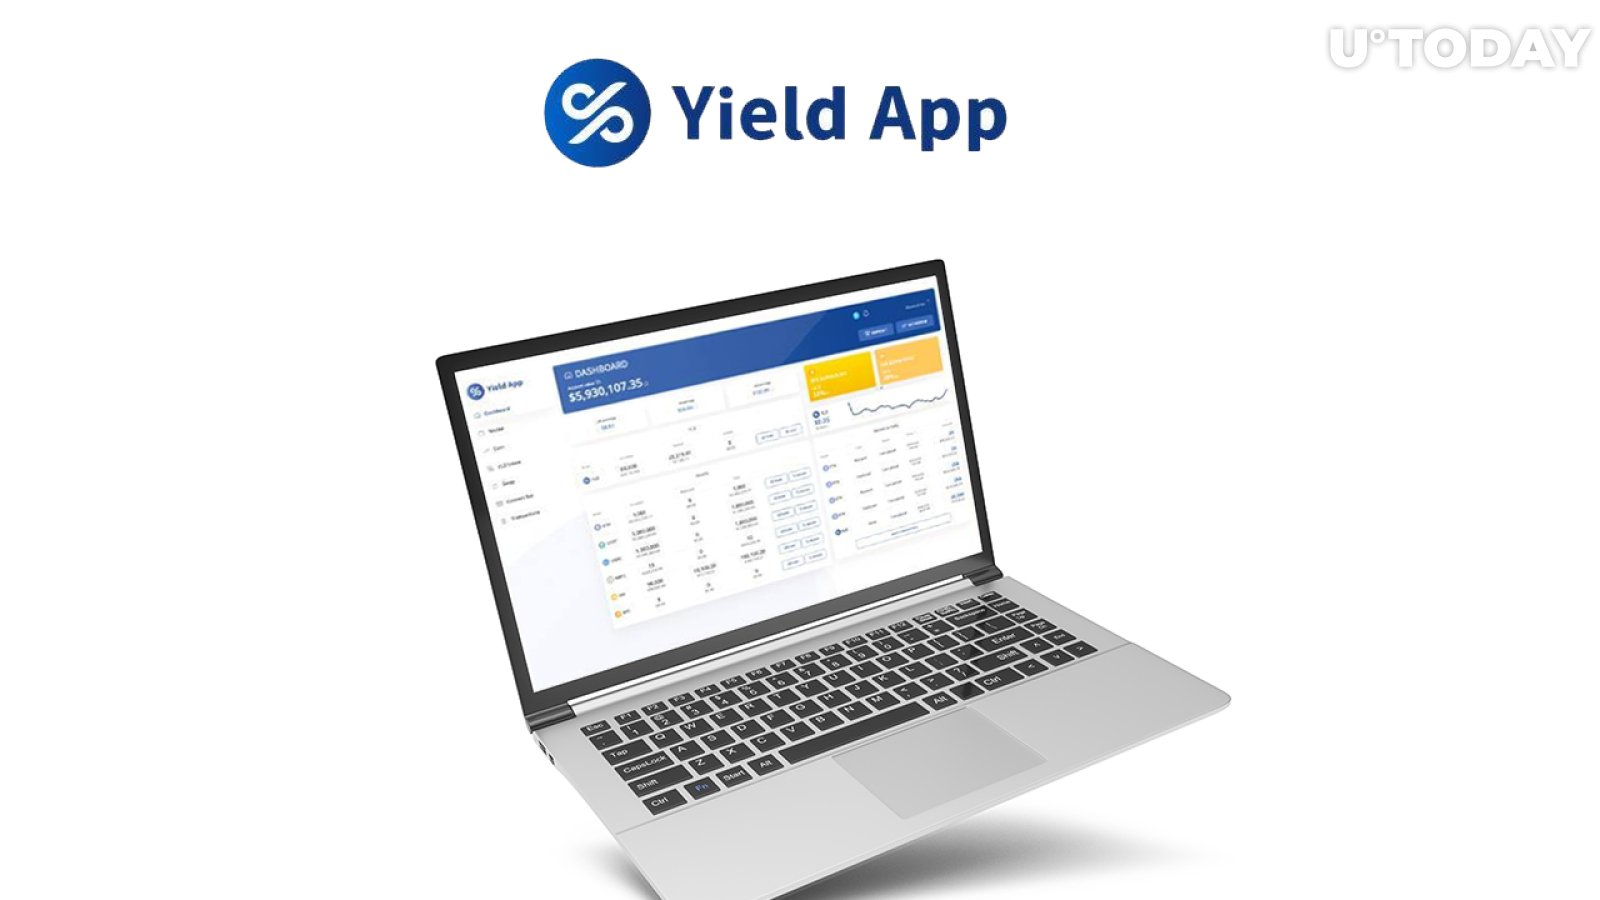 Yield App's V2 Launch Was a Great Success